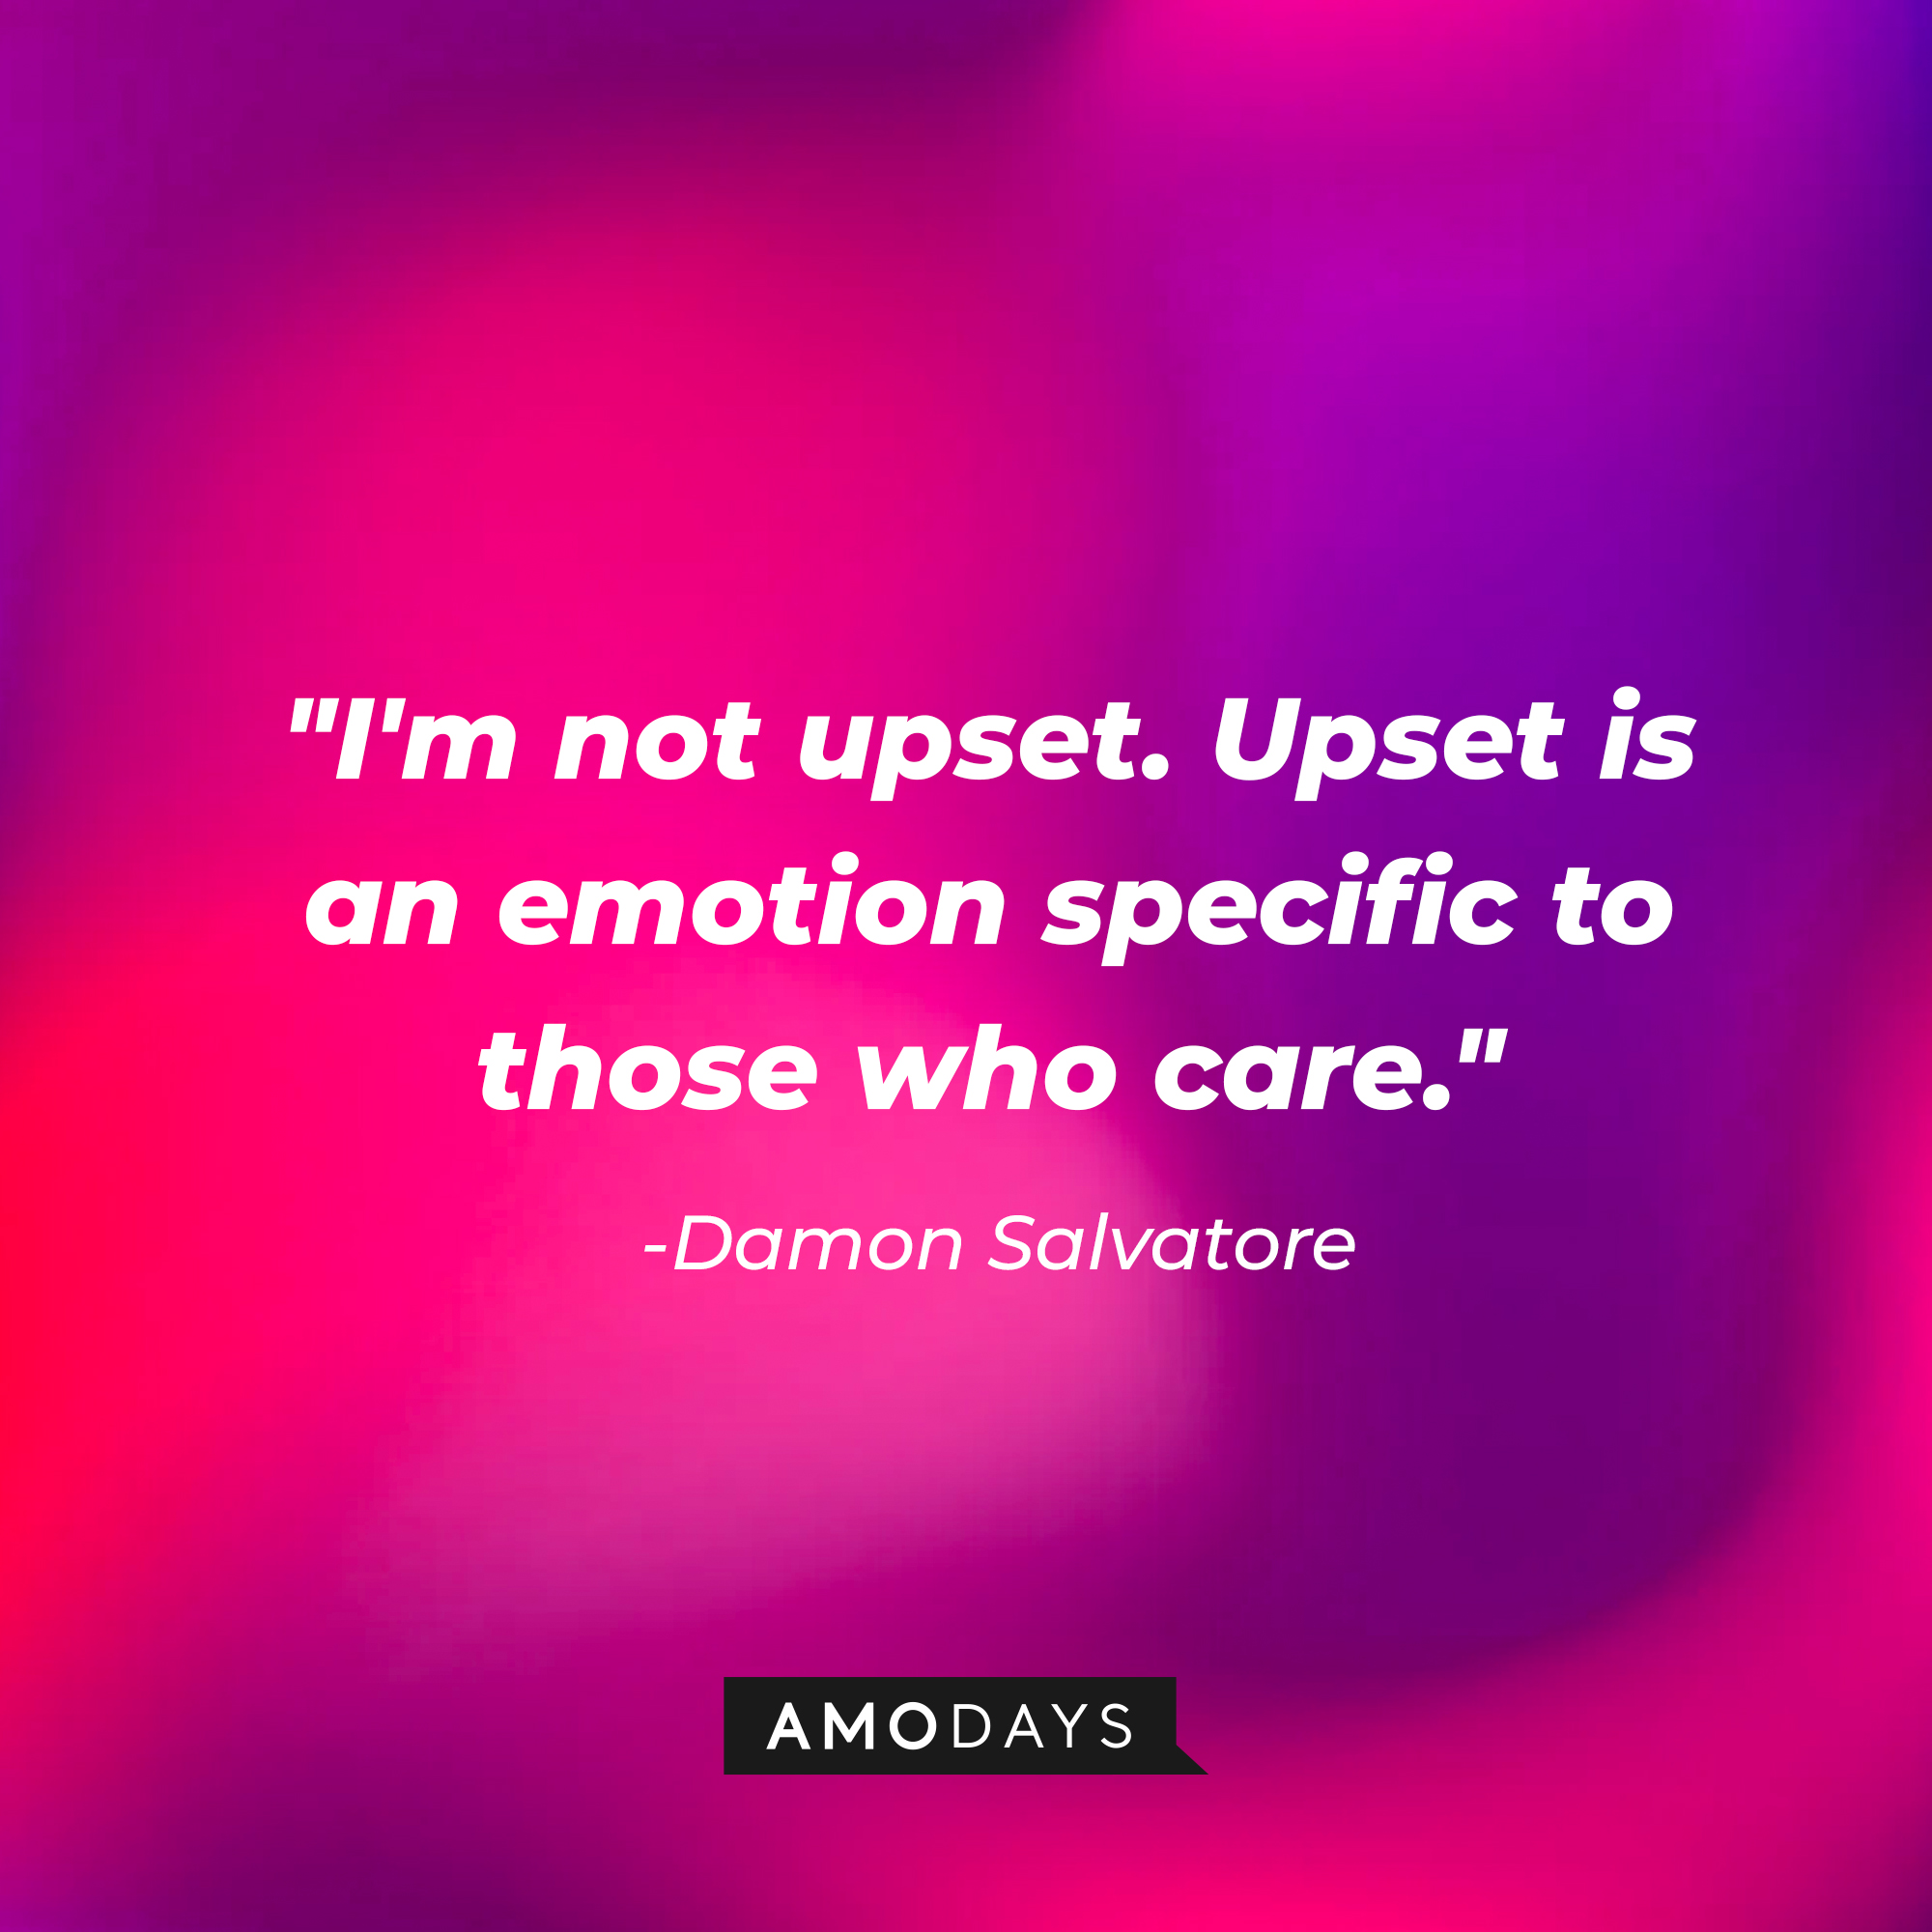 Damon Salvatore's quote: "I'm not upset. Upset is an emotion specific to those who care." | Source: AmoDays